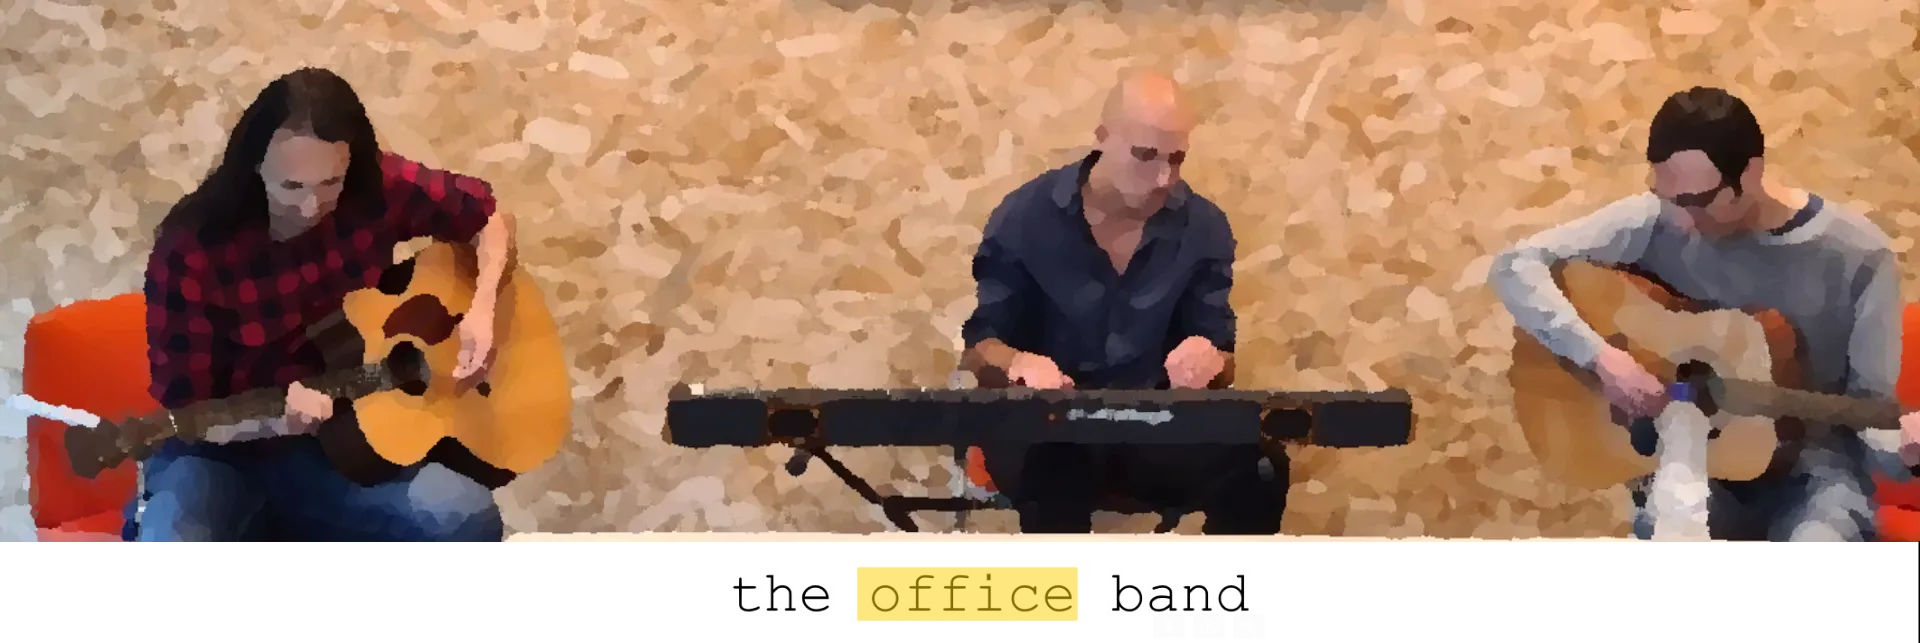 the office band